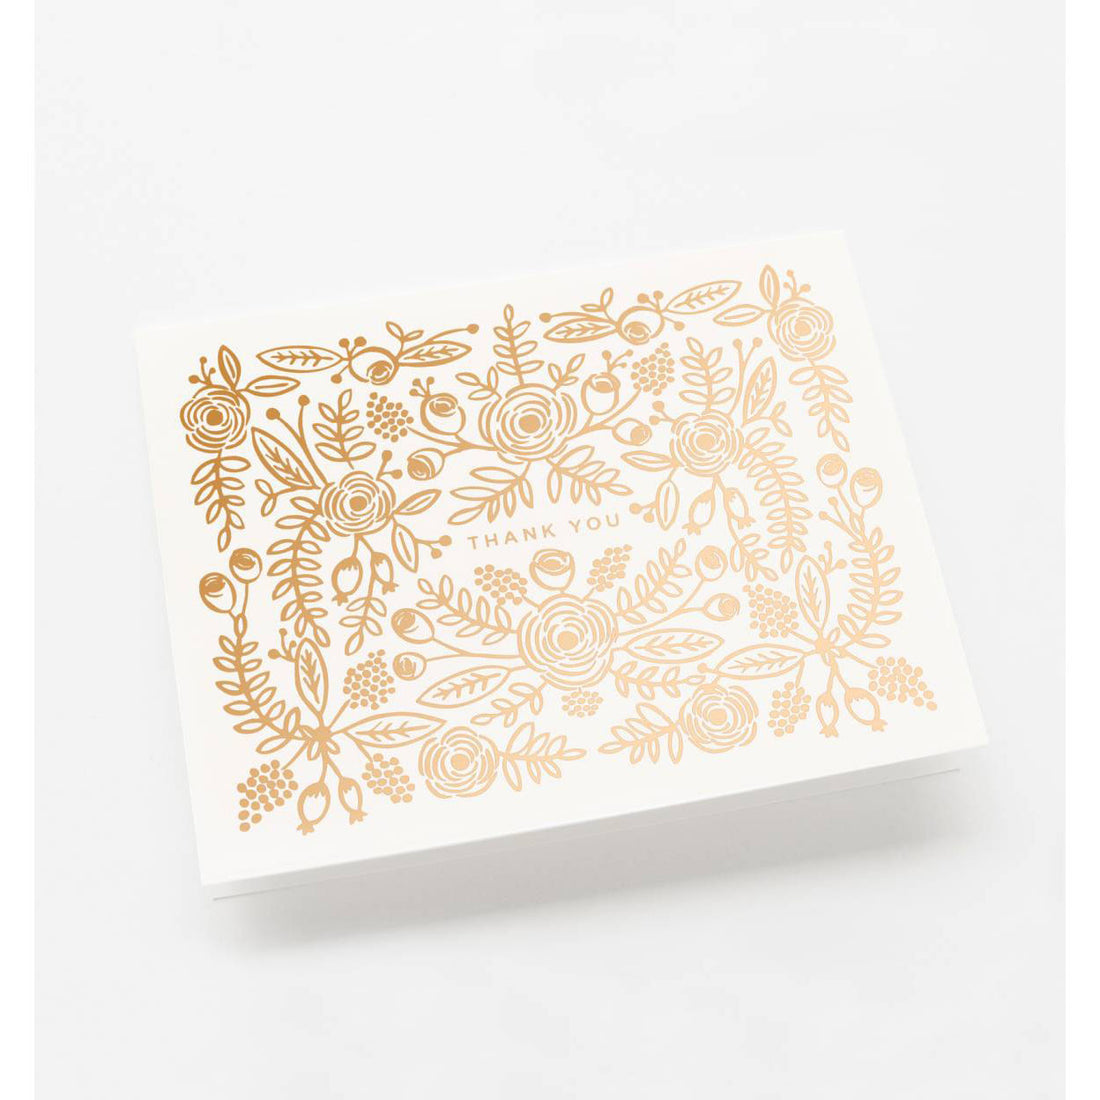 rifle-paper-co-rose-gold-thank-you-card- (2)